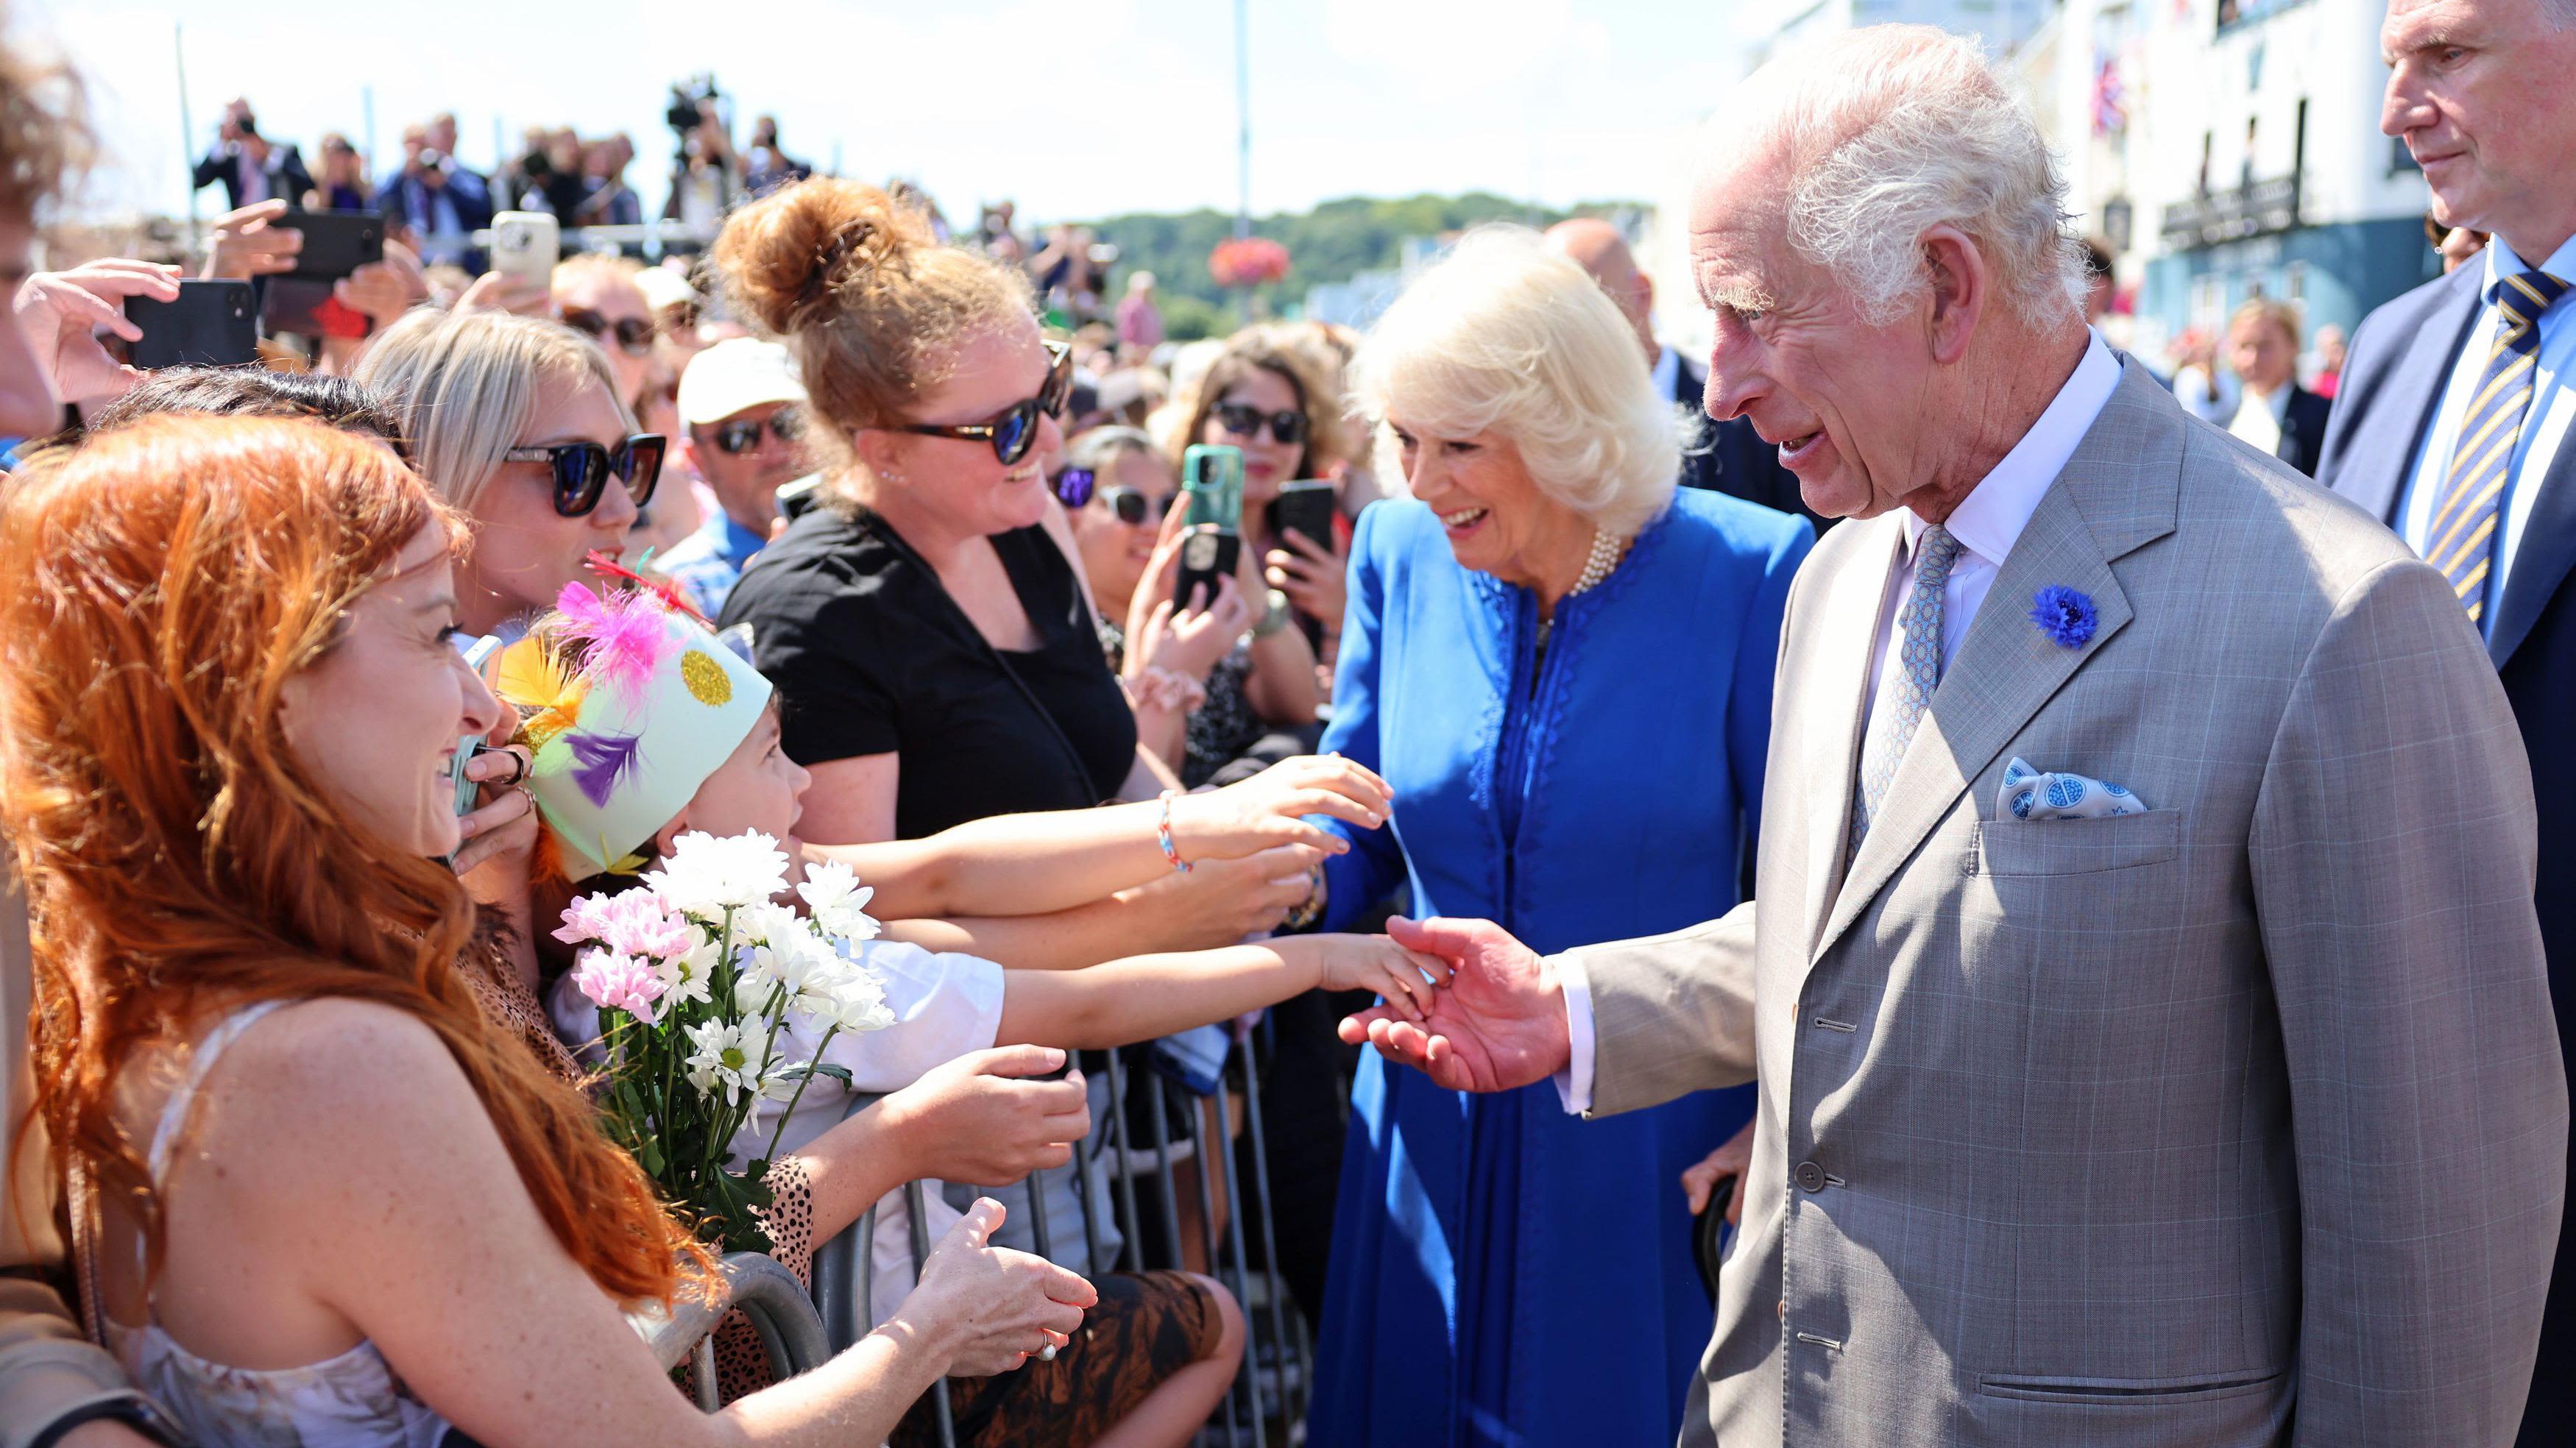 Sun shines for royals during visit to Guernsey